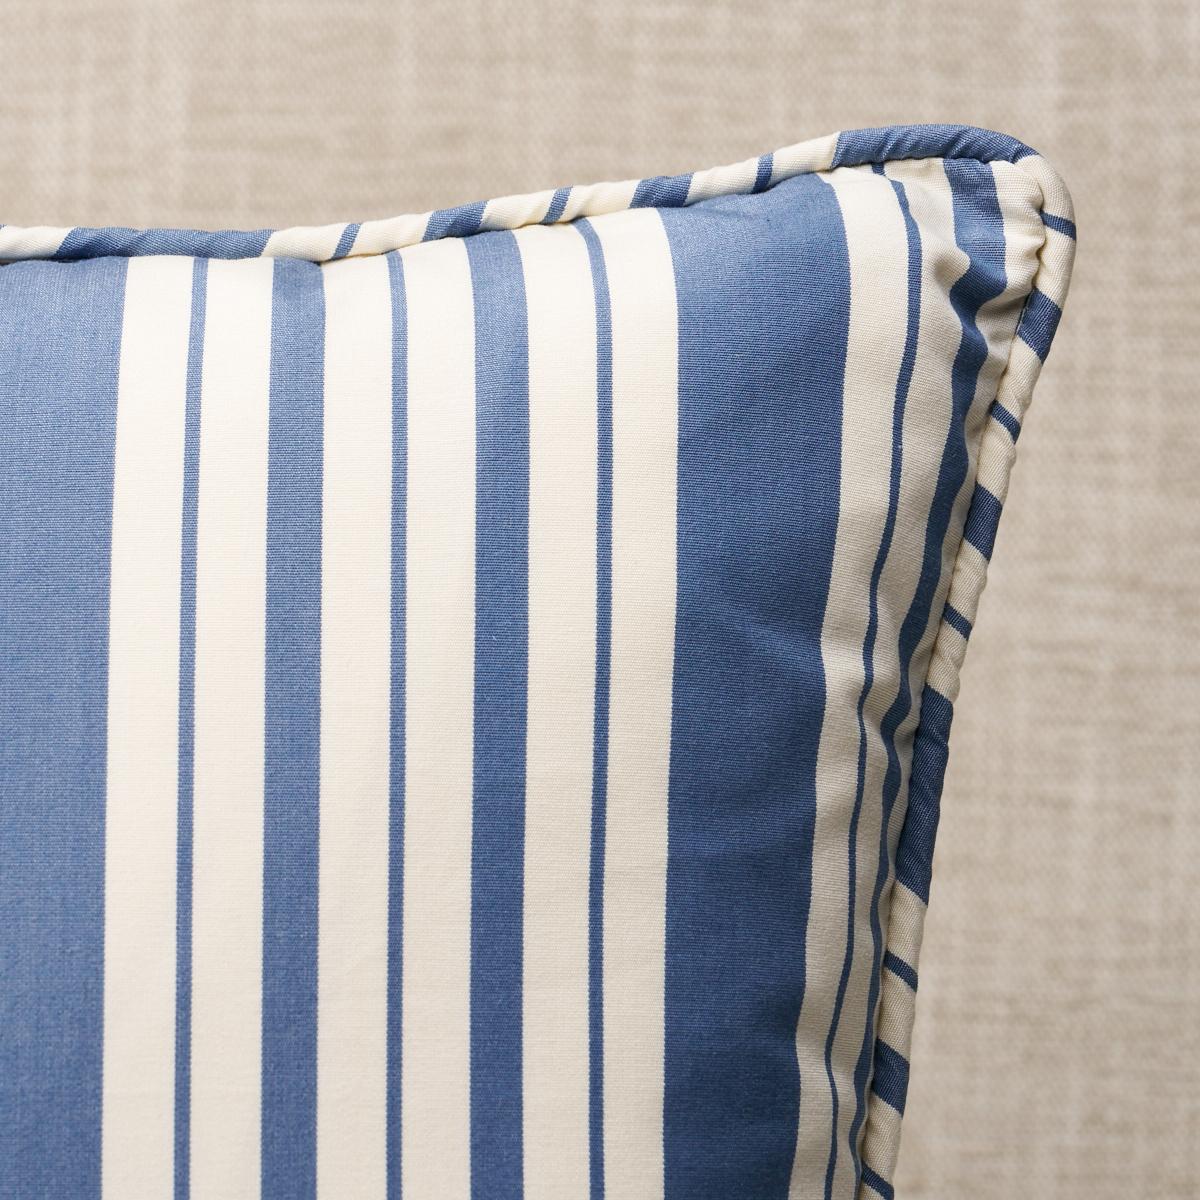 This pillow features Markie Stripe by Mark D. Sikes with a self welt finish. A fresh take on a traditional awning stripe, this versatile pattern by Mark D. Sikes has perfect proportions and classic good looks. Pillow includes a feather/down fill